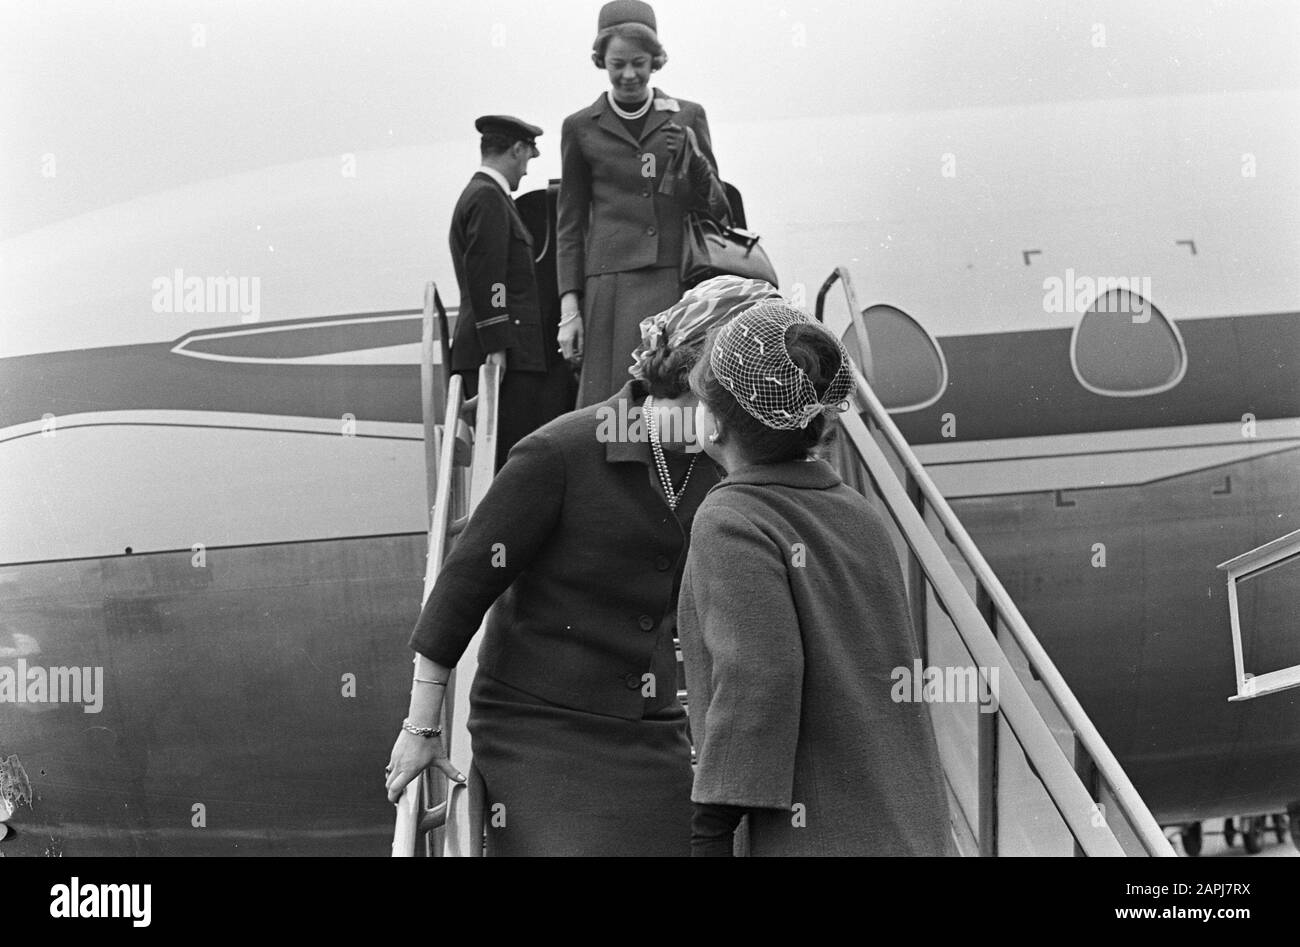 Danish Princess Benedikte in the Netherlands, Princess Benedikte and Princess Margriet Date: April 6, 1965 Location: Noord-Holland, Schiphol Personal name: Benedikte, Princess of Denmark, Margriet, princess Stock Photo